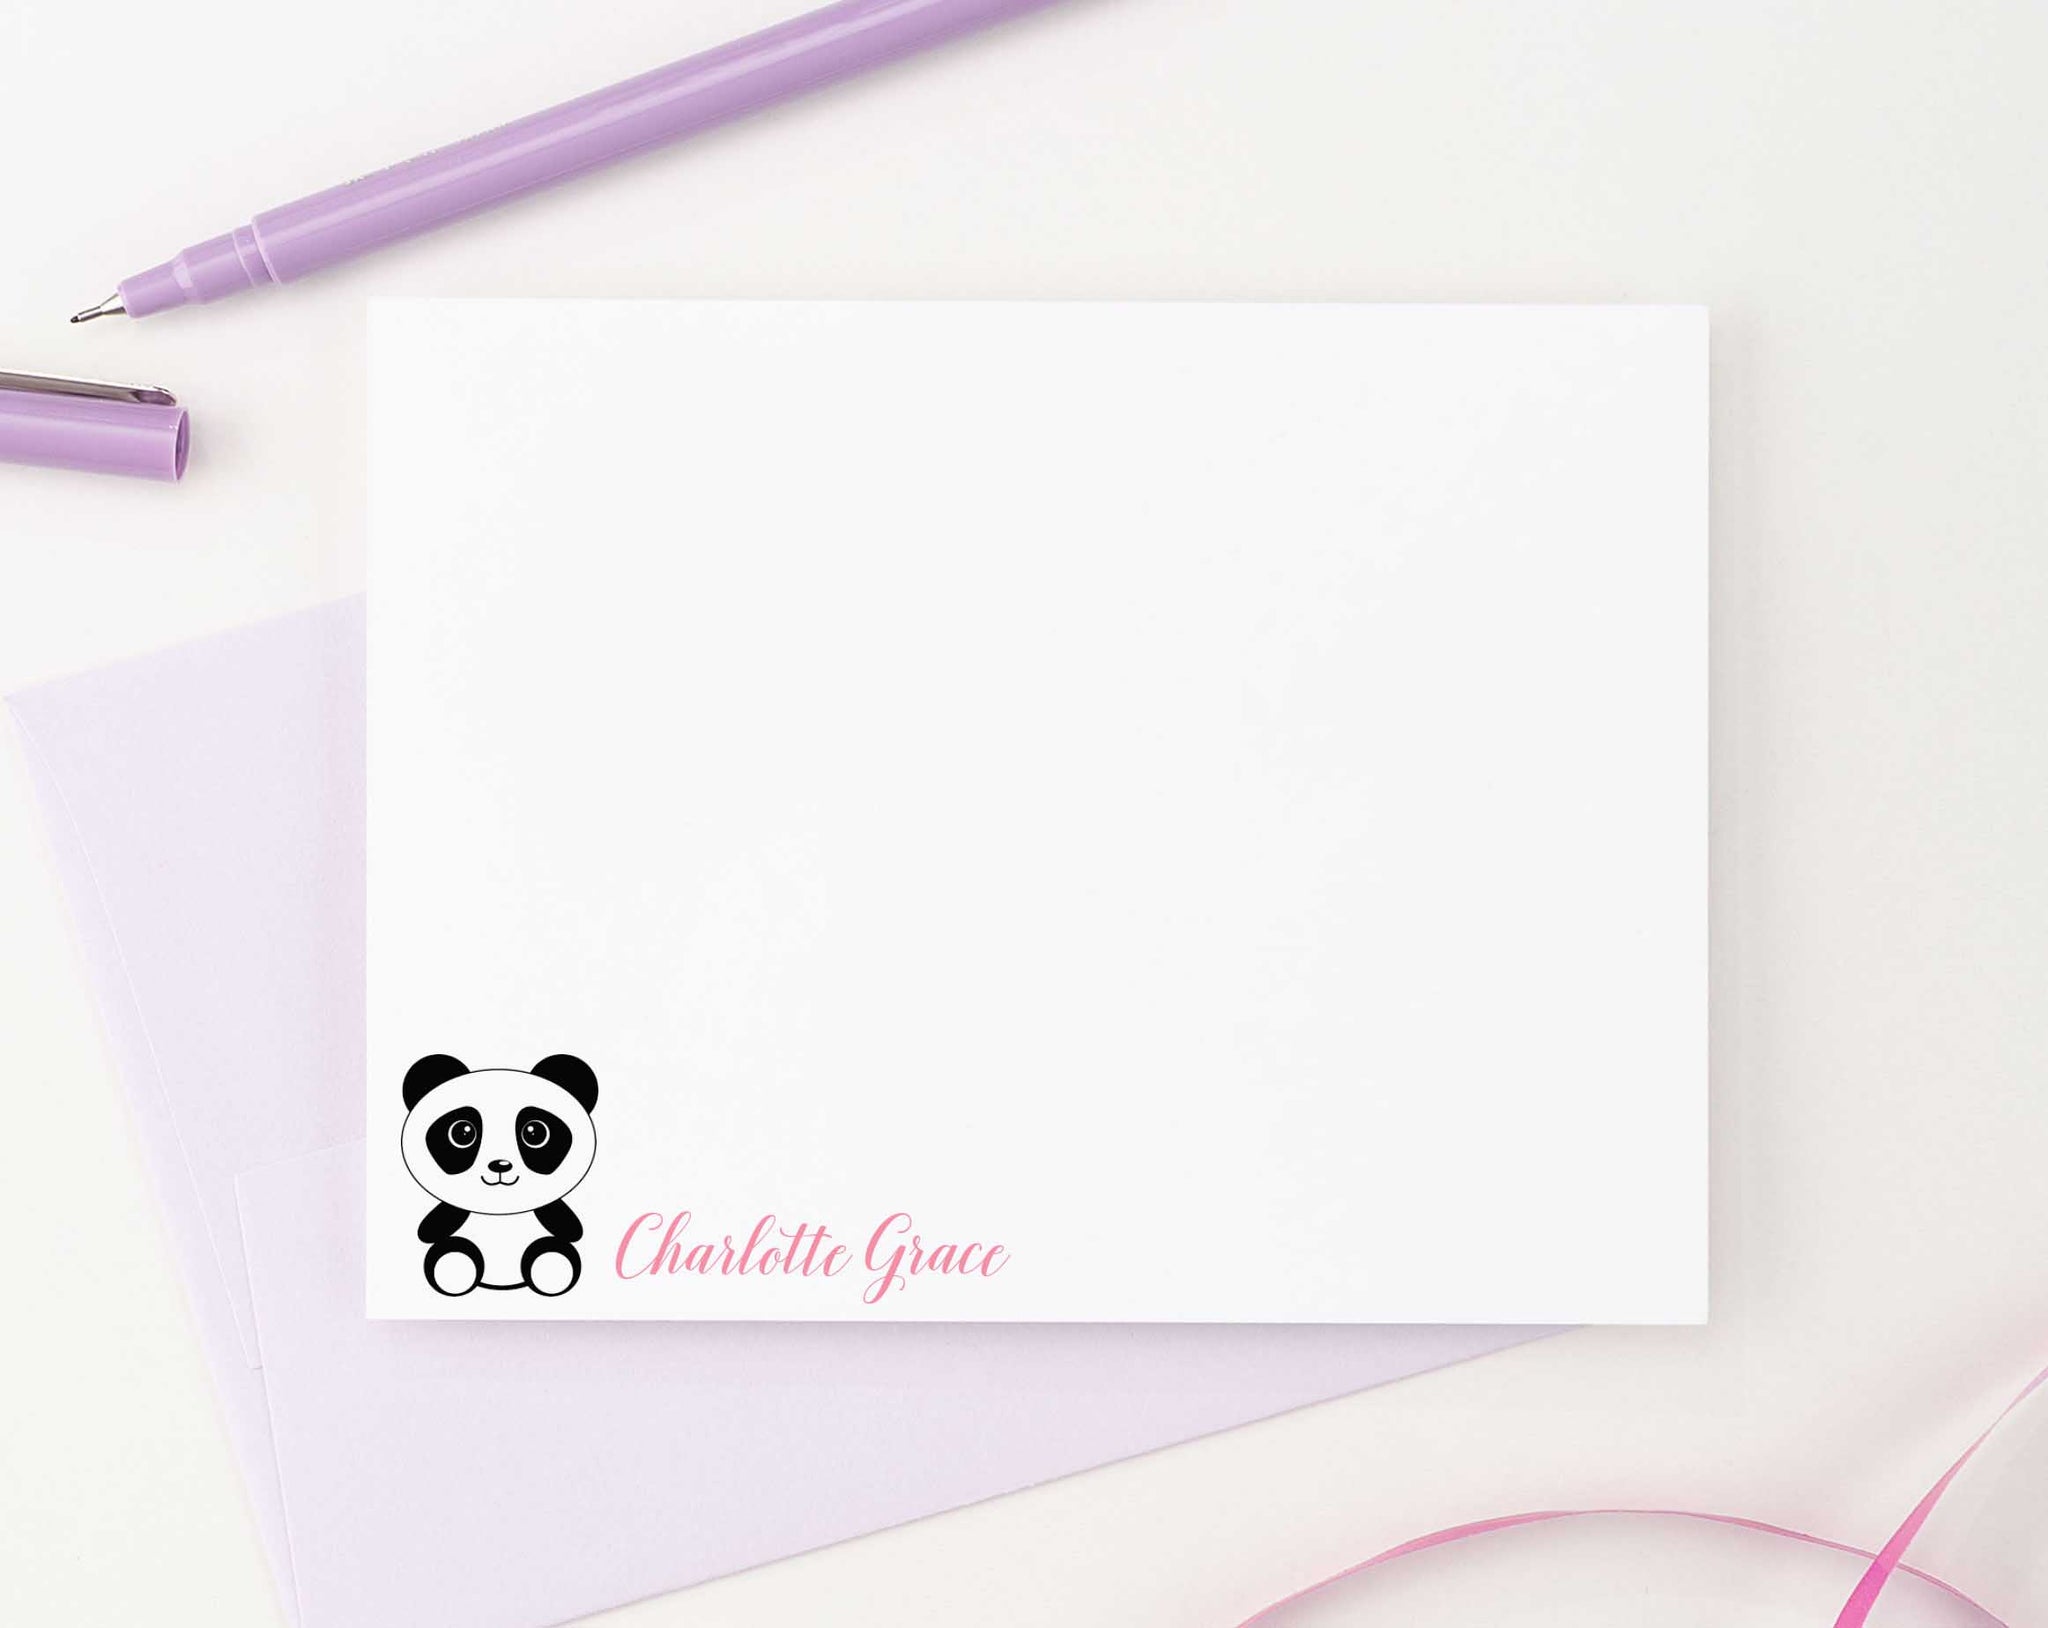  Cute Stationery Set : Office Products